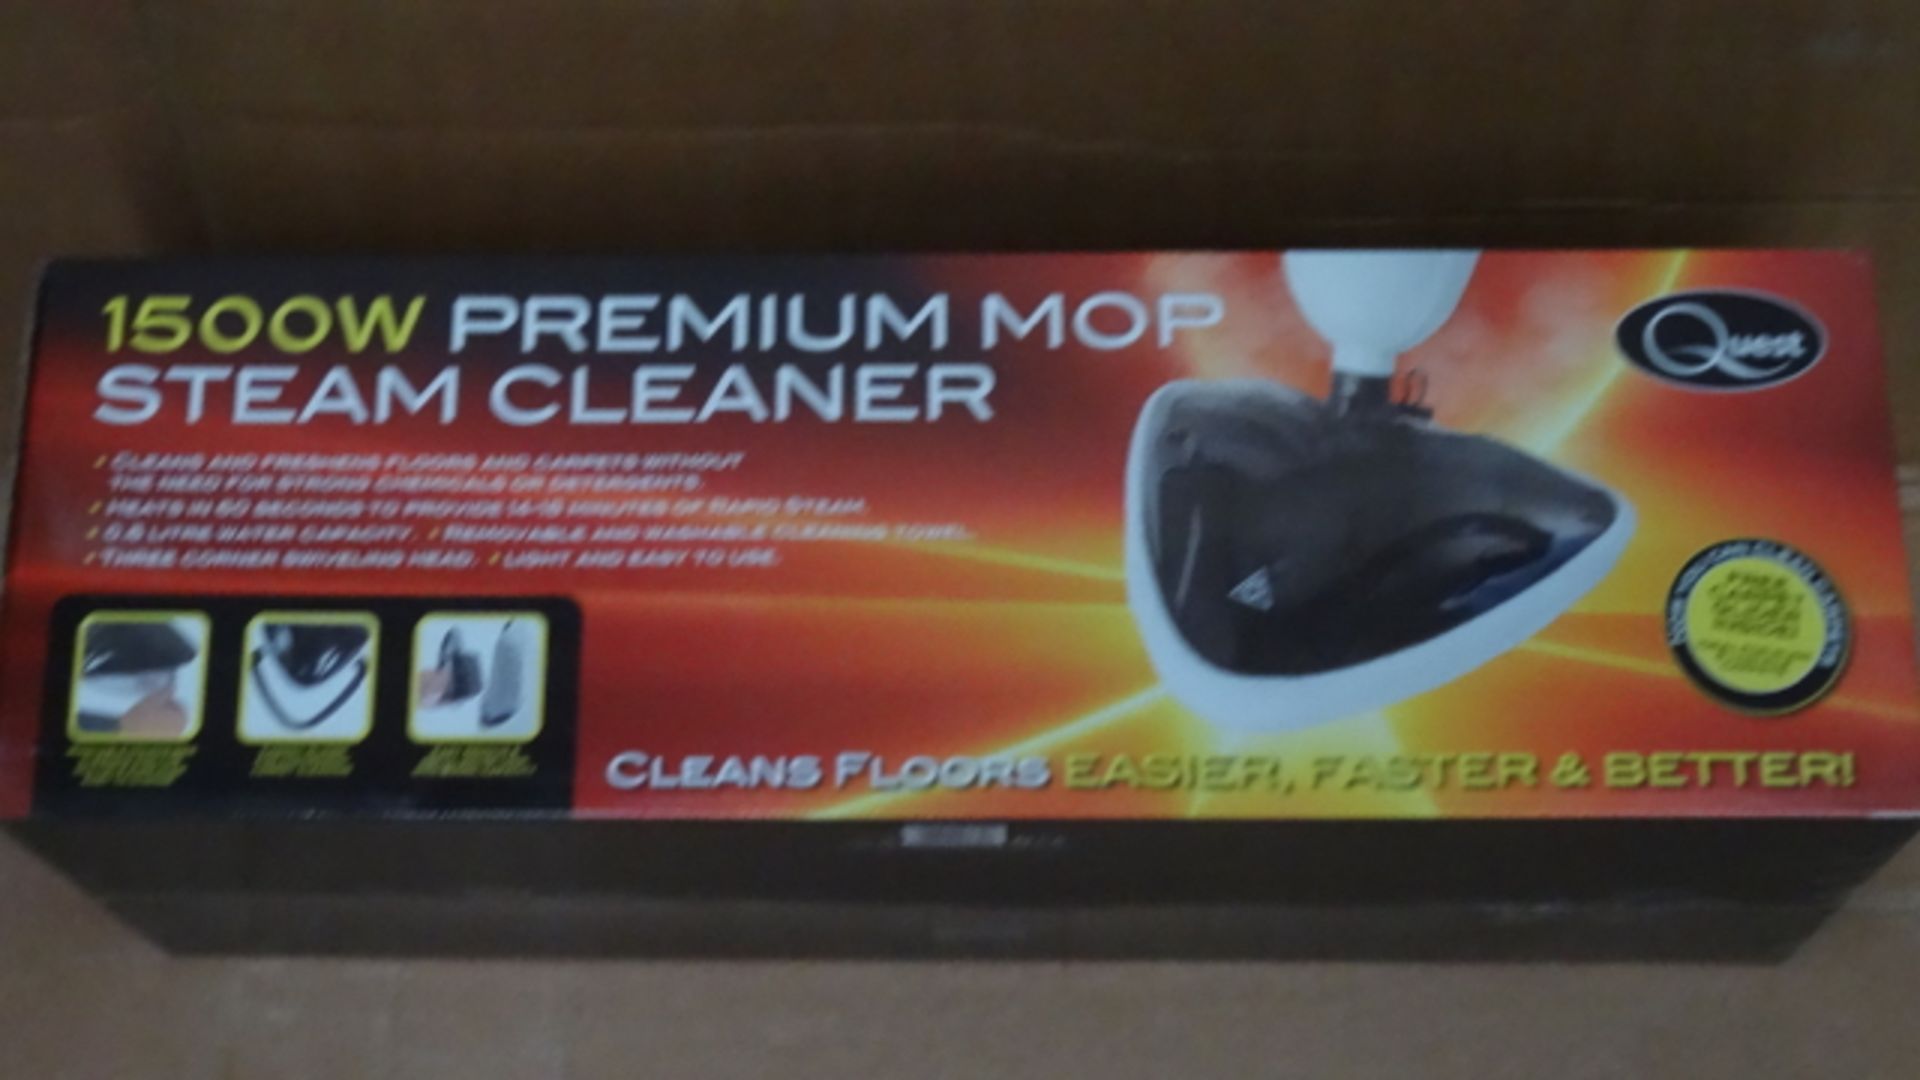 2 x Brand New Quest 1500W Premium Mop Steam Cleaners. Cleans floors, carpets, work surfaces and - Image 2 of 3